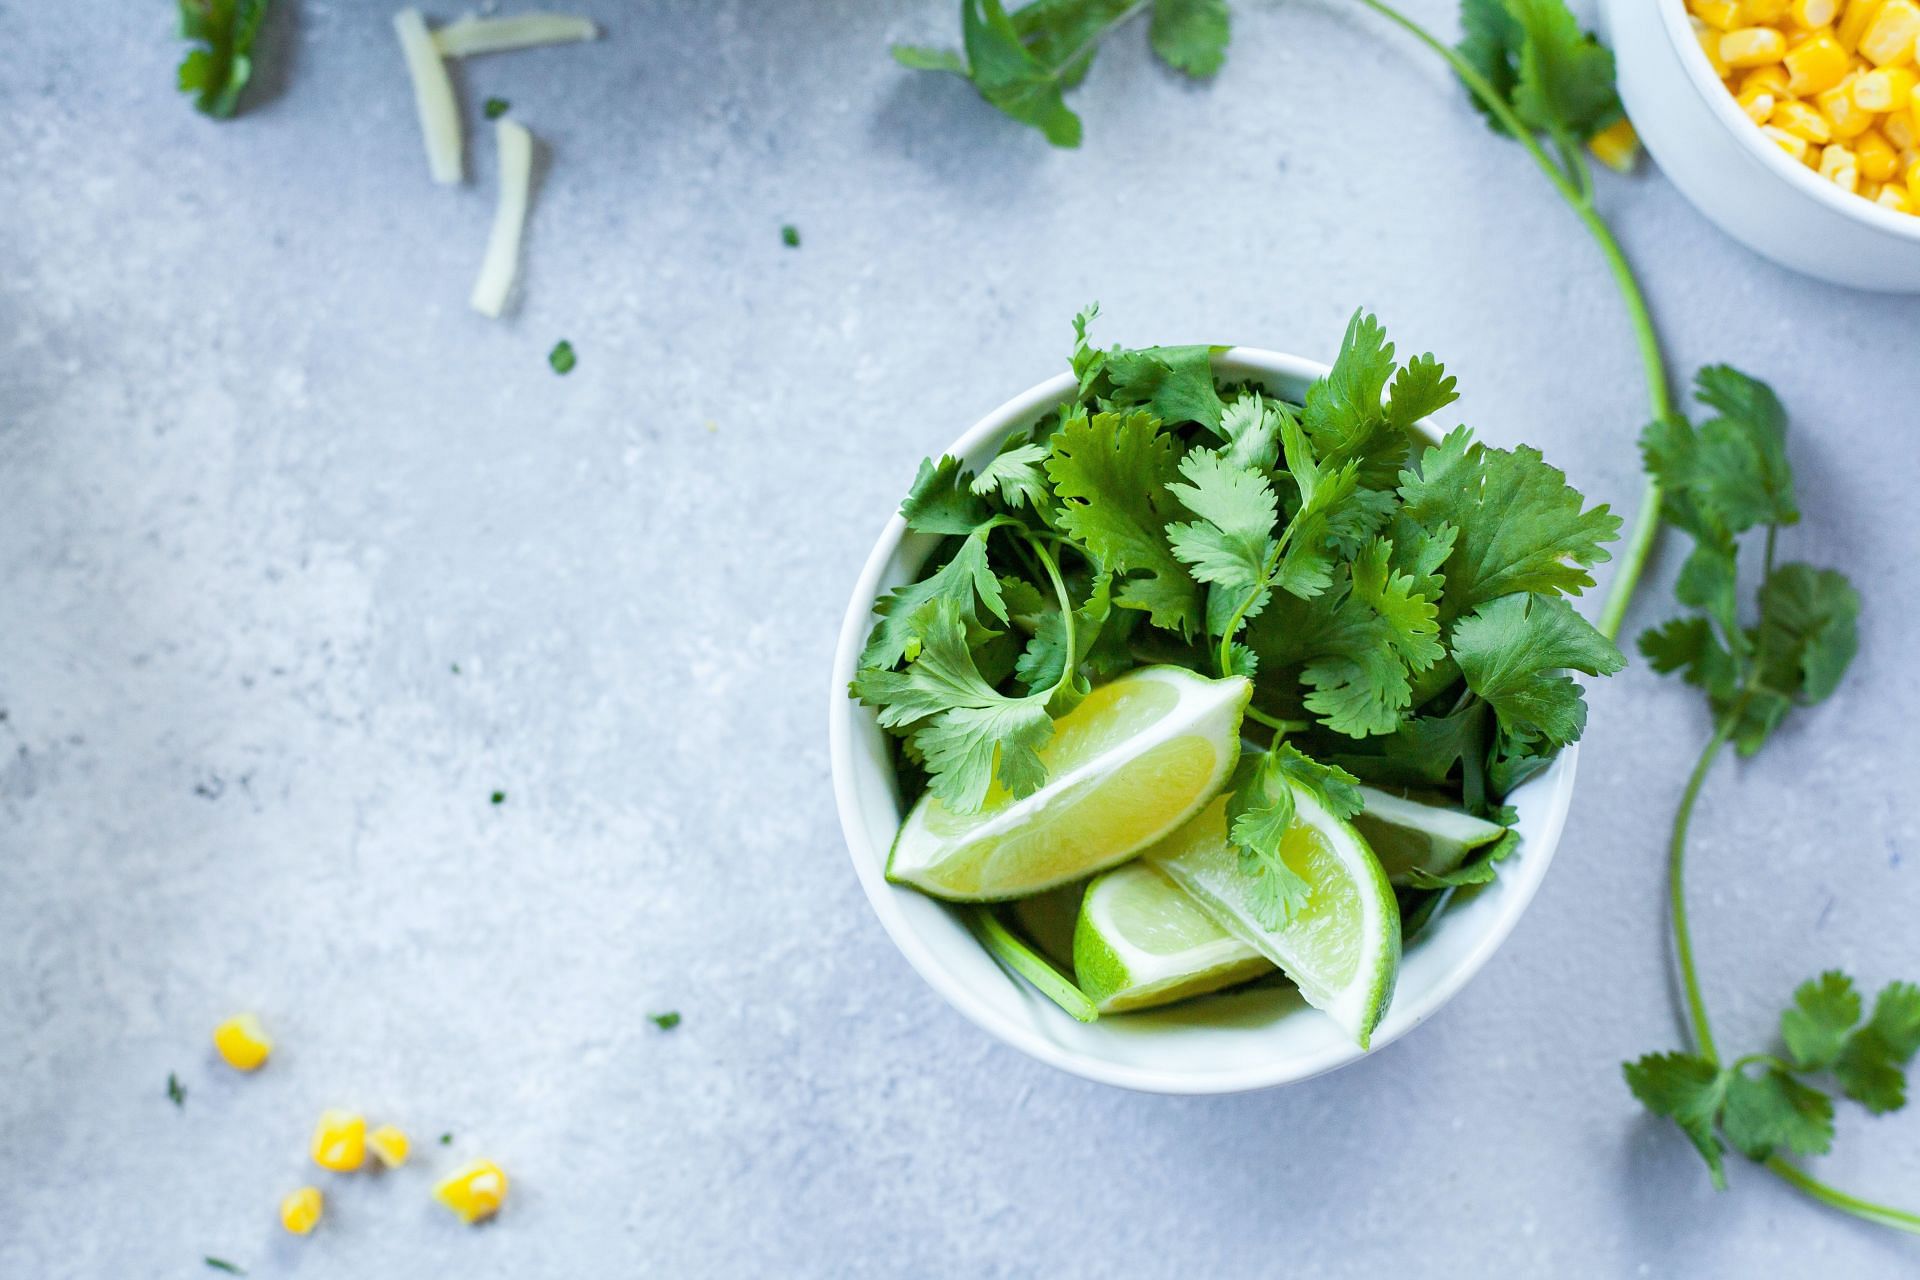 The health benefits of coriander ranges from better heart health and digestion to better skin protectant. (Image via Unsplash/Lindsay Moe)